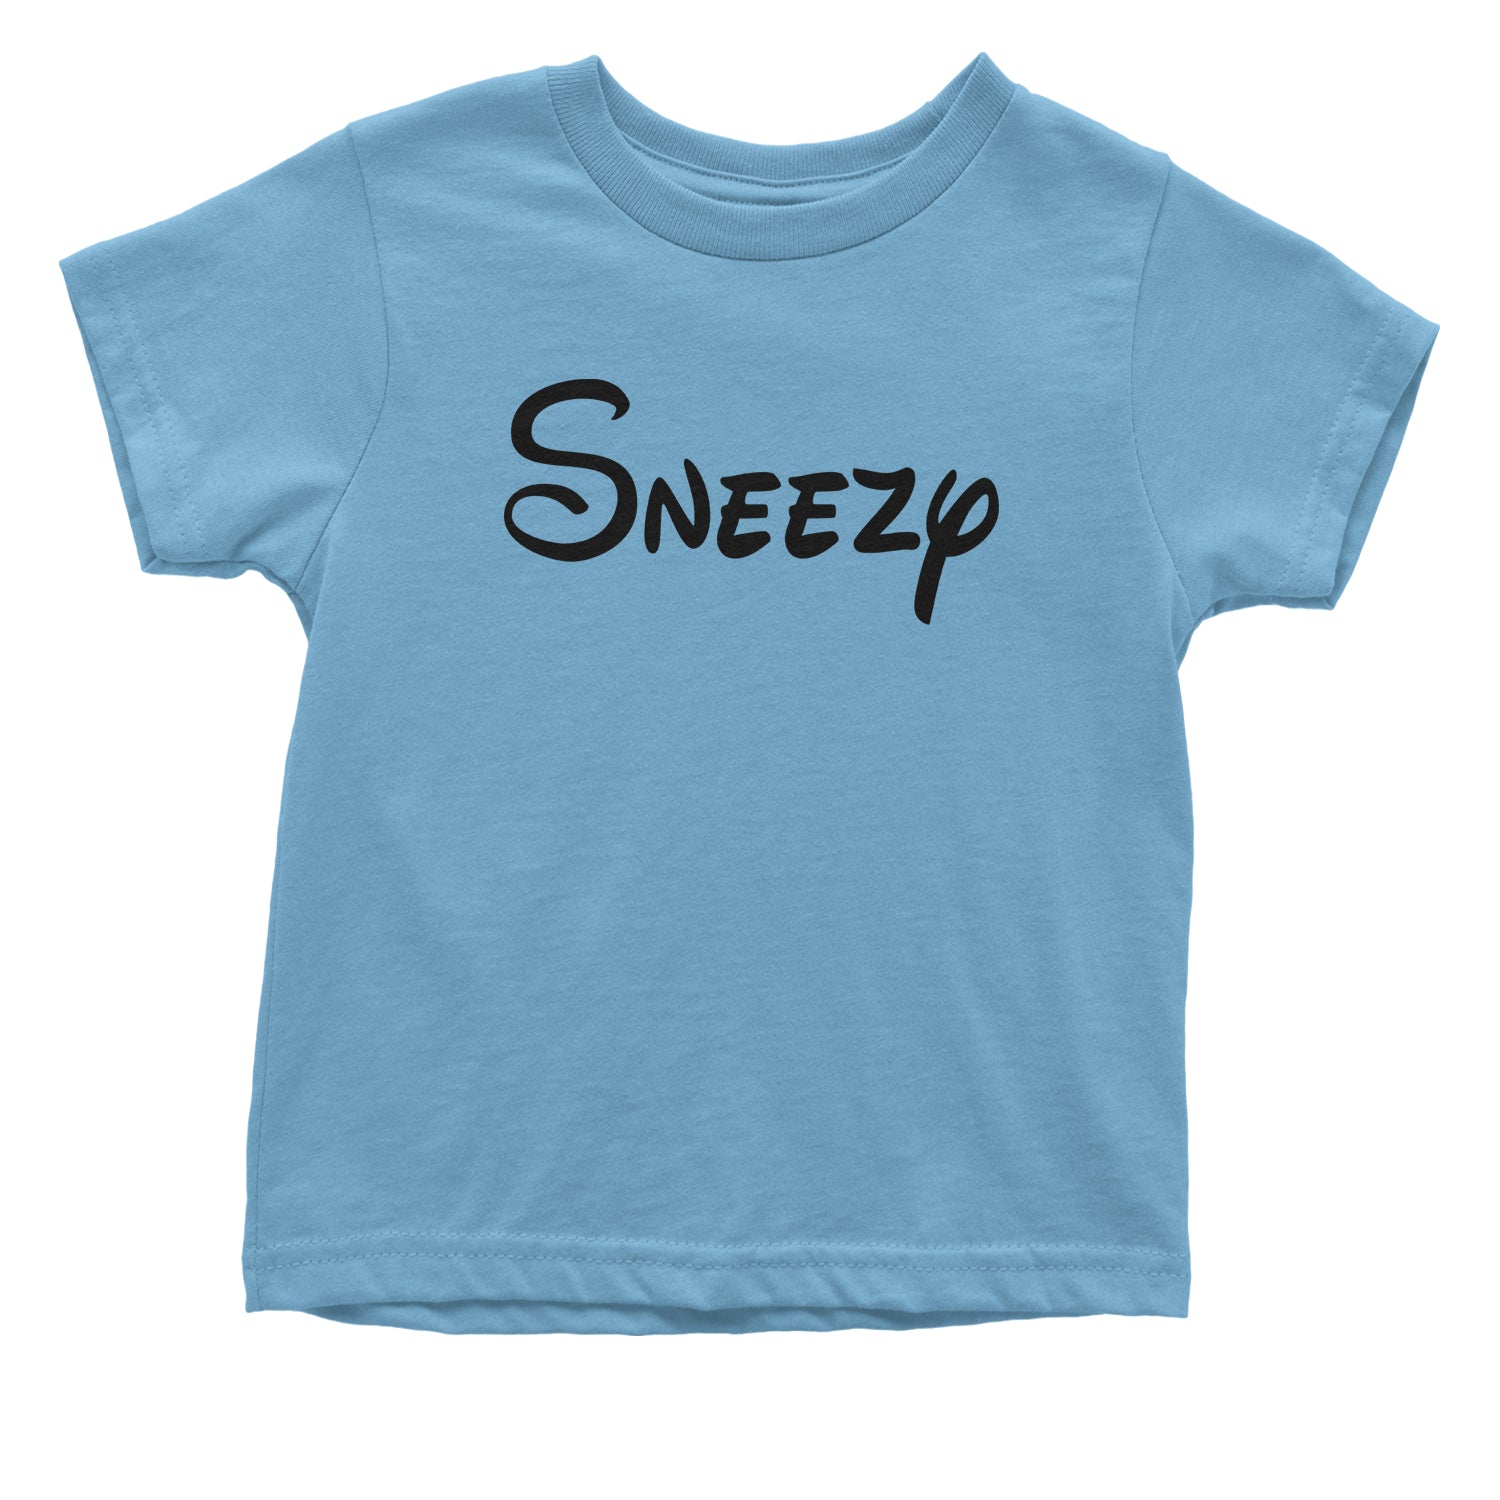 Sneezy - 7 Dwarfs Costume Toddler T-Shirt and, costume, dwarfs, group, halloween, matching, seven, snow, the, white by Expression Tees